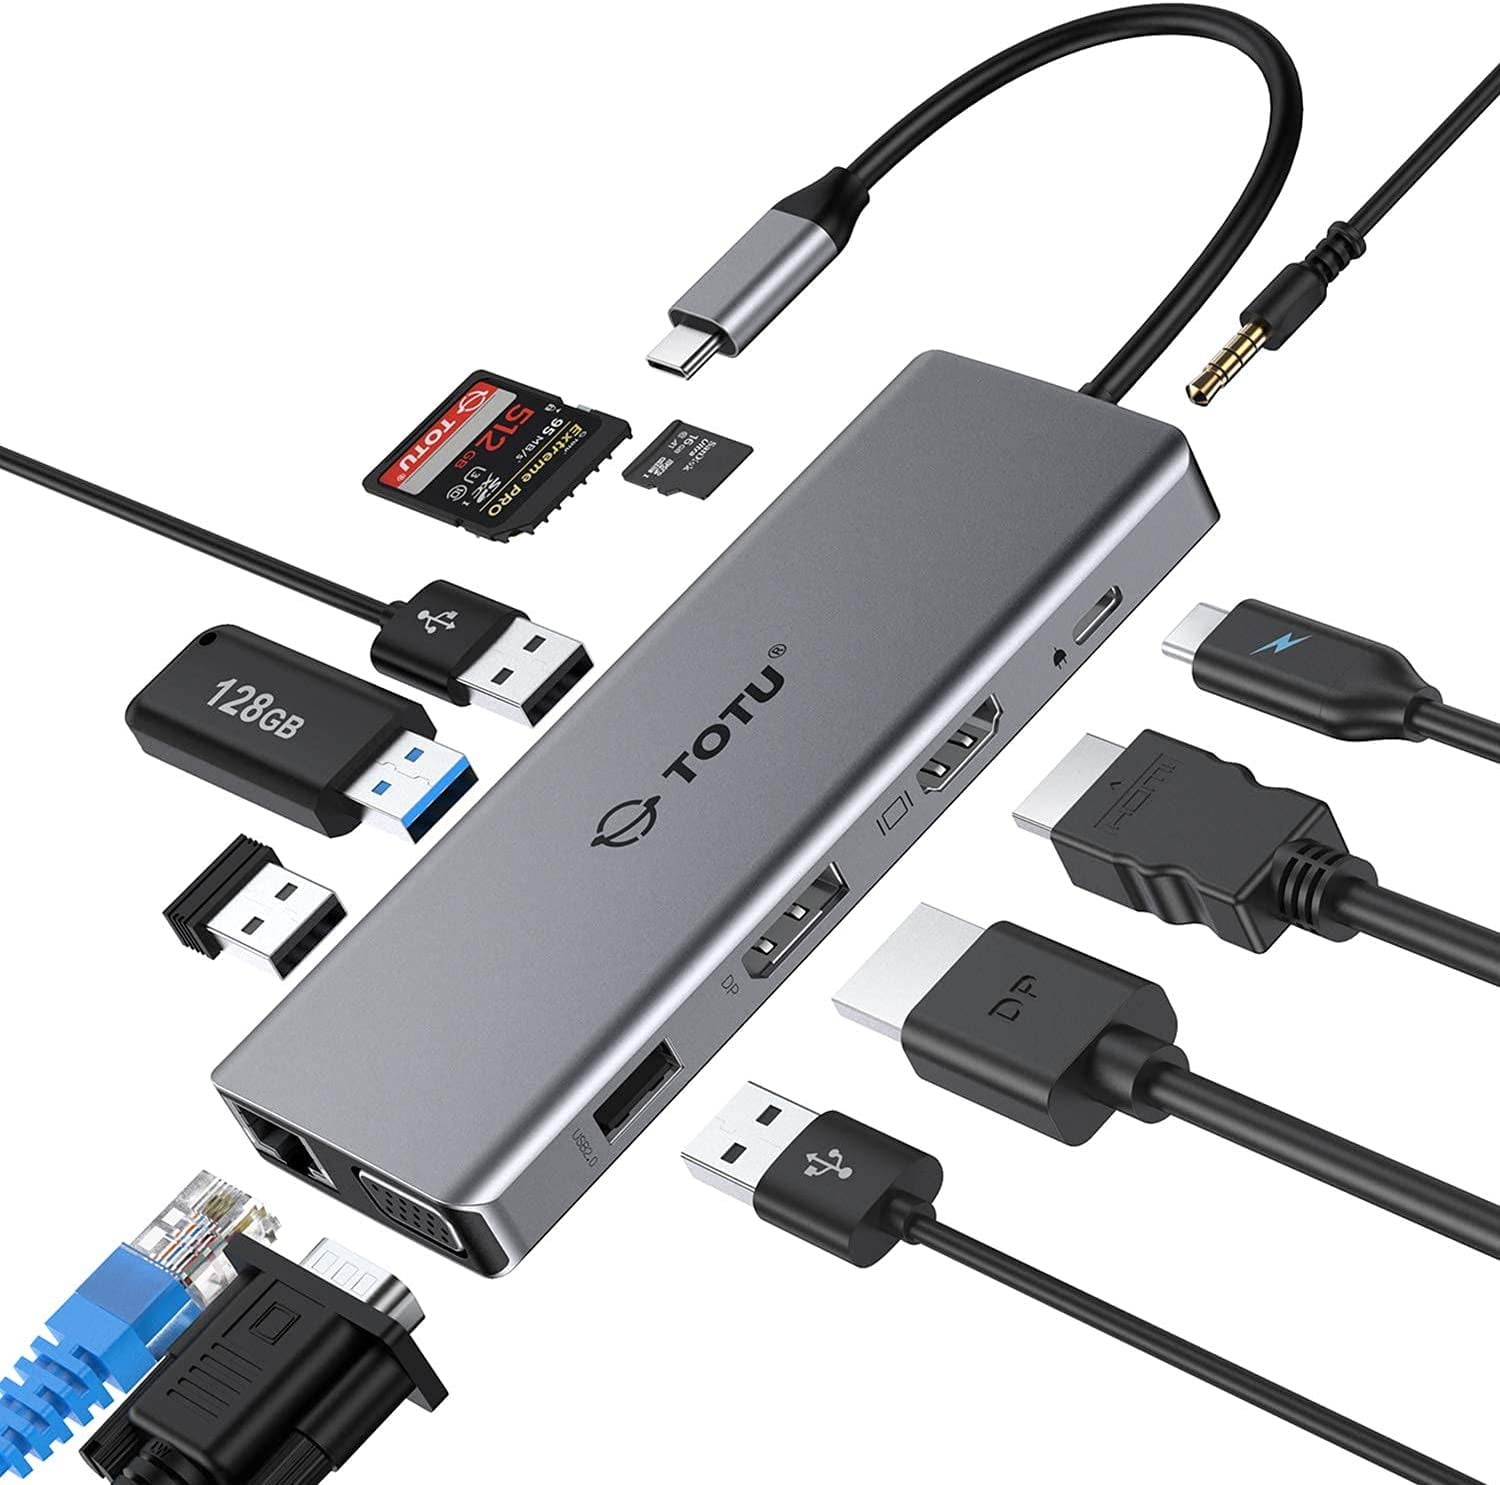 BENFEI USB Hub with 4 USB Ports and USB Type-C/Type-A 2in1 Cord Design  Compatible with MacBook, Mac Pro/Mini, iMac, Ps4, PS5, Surface Pro,Flash  Drive